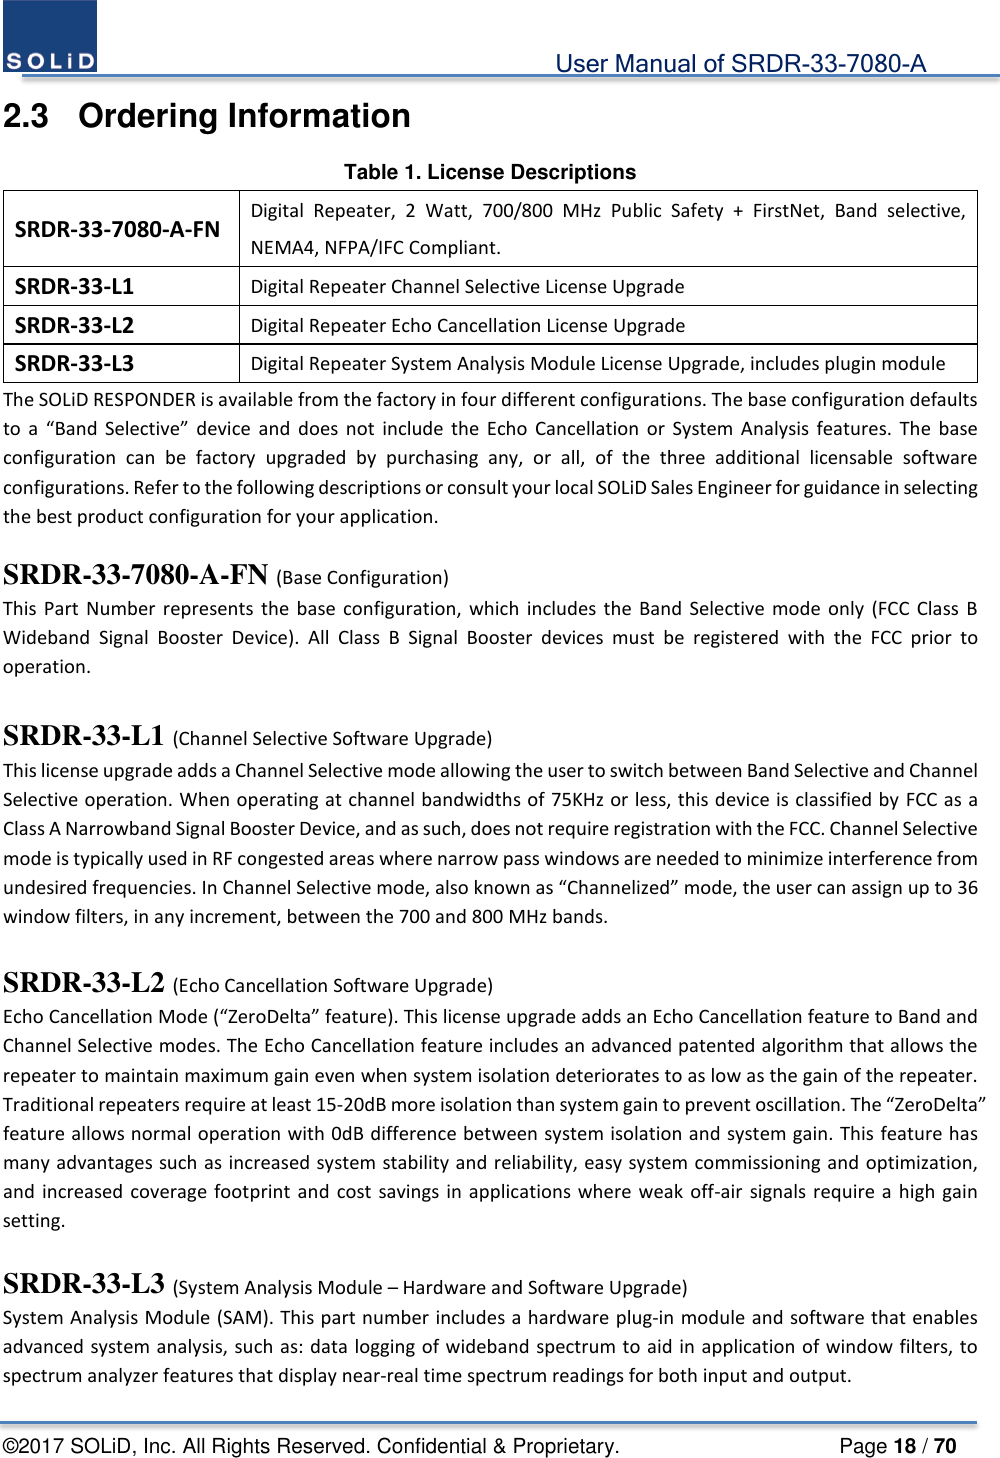                                             User Manual of SRDR-33-7080-A ©2017 SOLiD, Inc. All Rights Reserved. Confidential &amp; Proprietary.                     Page 18 / 70 2.3  Ordering Information Table 1. License Descriptions SRDR-33-7080-A-FN Digital Repeater, 2 Watt, 700/800 MHz Public Safety + FirstNet, Band selective, NEMA4, NFPA/IFC Compliant. SRDR-33-L1 Digital Repeater Channel Selective License Upgrade SRDR-33-L2 Digital Repeater Echo Cancellation License Upgrade SRDR-33-L3 Digital Repeater System Analysis Module License Upgrade, includes plugin module The SOLiD RESPONDER is available from the factory in four different configurations. The base configuration defaults to a “Band Selective” device and does not include the Echo Cancellation or System Analysis features. The base configuration can be factory upgraded by purchasing any, or all, of the three additional licensable software configurations. Refer to the following descriptions or consult your local SOLiD Sales Engineer for guidance in selecting the best product configuration for your application.  SRDR-33-7080-A-FN (Base Configuration) This Part Number represents the base configuration, which includes the Band Selective mode only (FCC Class B Wideband Signal Booster Device). All Class B Signal Booster devices must be registered with the FCC prior to operation.    SRDR-33-L1 (Channel Selective Software Upgrade)   This license upgrade adds a Channel Selective mode allowing the user to switch between Band Selective and Channel Selective operation. When operating at channel bandwidths of 75KHz or less, this device is classified by FCC as a Class A Narrowband Signal Booster Device, and as such, does not require registration with the FCC. Channel Selective mode is typically used in RF congested areas where narrow pass windows are needed to minimize interference from undesired frequencies. In Channel Selective mode, also known as “Channelized” mode, the user can assign up to 36 window filters, in any increment, between the 700 and 800 MHz bands.    SRDR-33-L2 (Echo Cancellation Software Upgrade)   Echo Cancellation Mode (“ZeroDelta” feature). This license upgrade adds an Echo Cancellation feature to Band and Channel Selective modes. The Echo Cancellation feature includes an advanced patented algorithm that allows the repeater to maintain maximum gain even when system isolation deteriorates to as low as the gain of the repeater. Traditional repeaters require at least 15-20dB more isolation than system gain to prevent oscillation. The “ZeroDelta” feature allows normal operation with 0dB difference between system isolation and system gain. This feature has many advantages such as increased system stability and reliability, easy system commissioning and optimization, and increased coverage footprint and cost savings in applications where weak off-air signals require a high gain setting.    SRDR-33-L3 (System Analysis Module – Hardware and Software Upgrade) System Analysis Module (SAM). This part number includes a hardware plug-in module and software that enables advanced system analysis, such as: data logging of wideband spectrum to aid in application of window filters, to spectrum analyzer features that display near-real time spectrum readings for both input and output. 